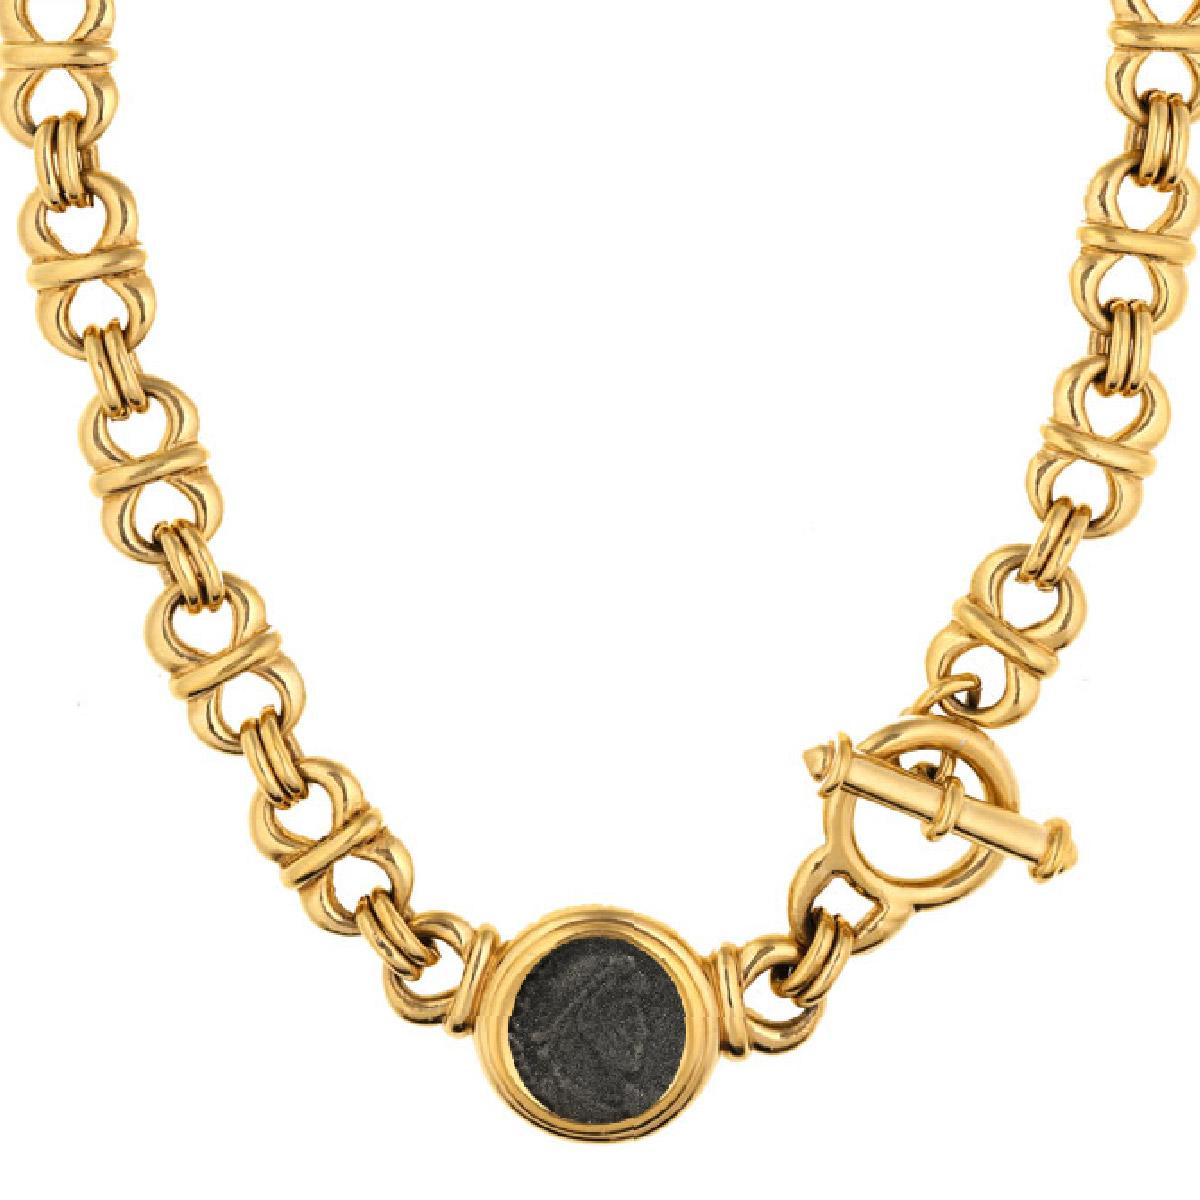 With a Roman inspired coin motif, this necklace will be a timeless addition to your jewelry collection.

PLEASE NOTE: The pieces available are not vintage and are not reproductions.
CINER uses original models to produce our jewelry today.

The Coin